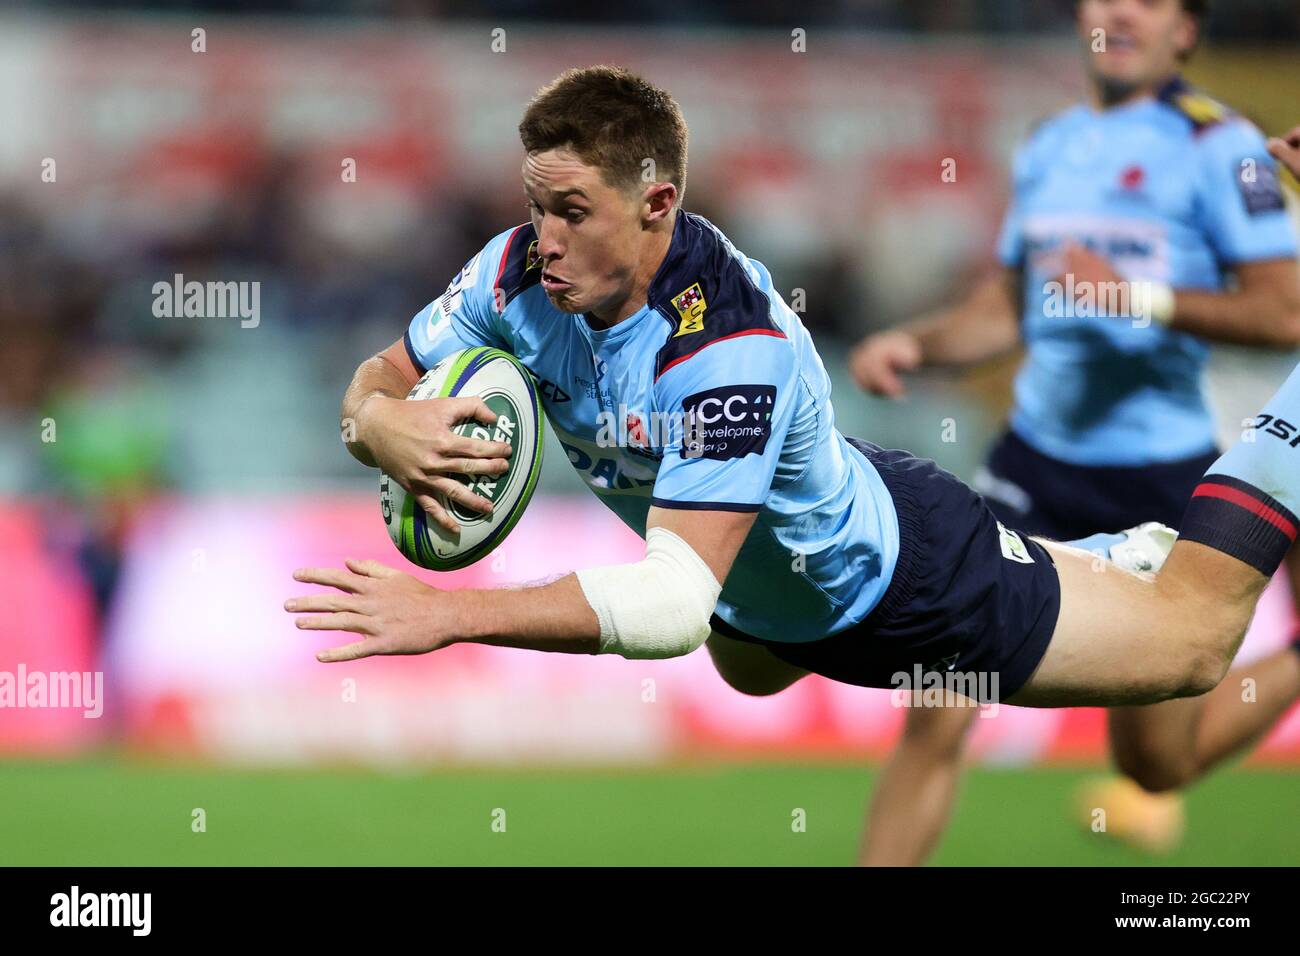 SYDNEY, AUSTRALIA - MAY 14: Alex Newsome of the Waratahs scores a try during round one of the Super Rugby Trans Tasman match between the NSW Waratahs and Hurricanes at Sydney Cricket Ground on May 14, 2021 in Sydney, Australia. (Photo by Pete Dovgan/Speed Media/Icon Sportswire). Credit: Pete Dovgan/Speed Media/Alamy Live News Stock Photo